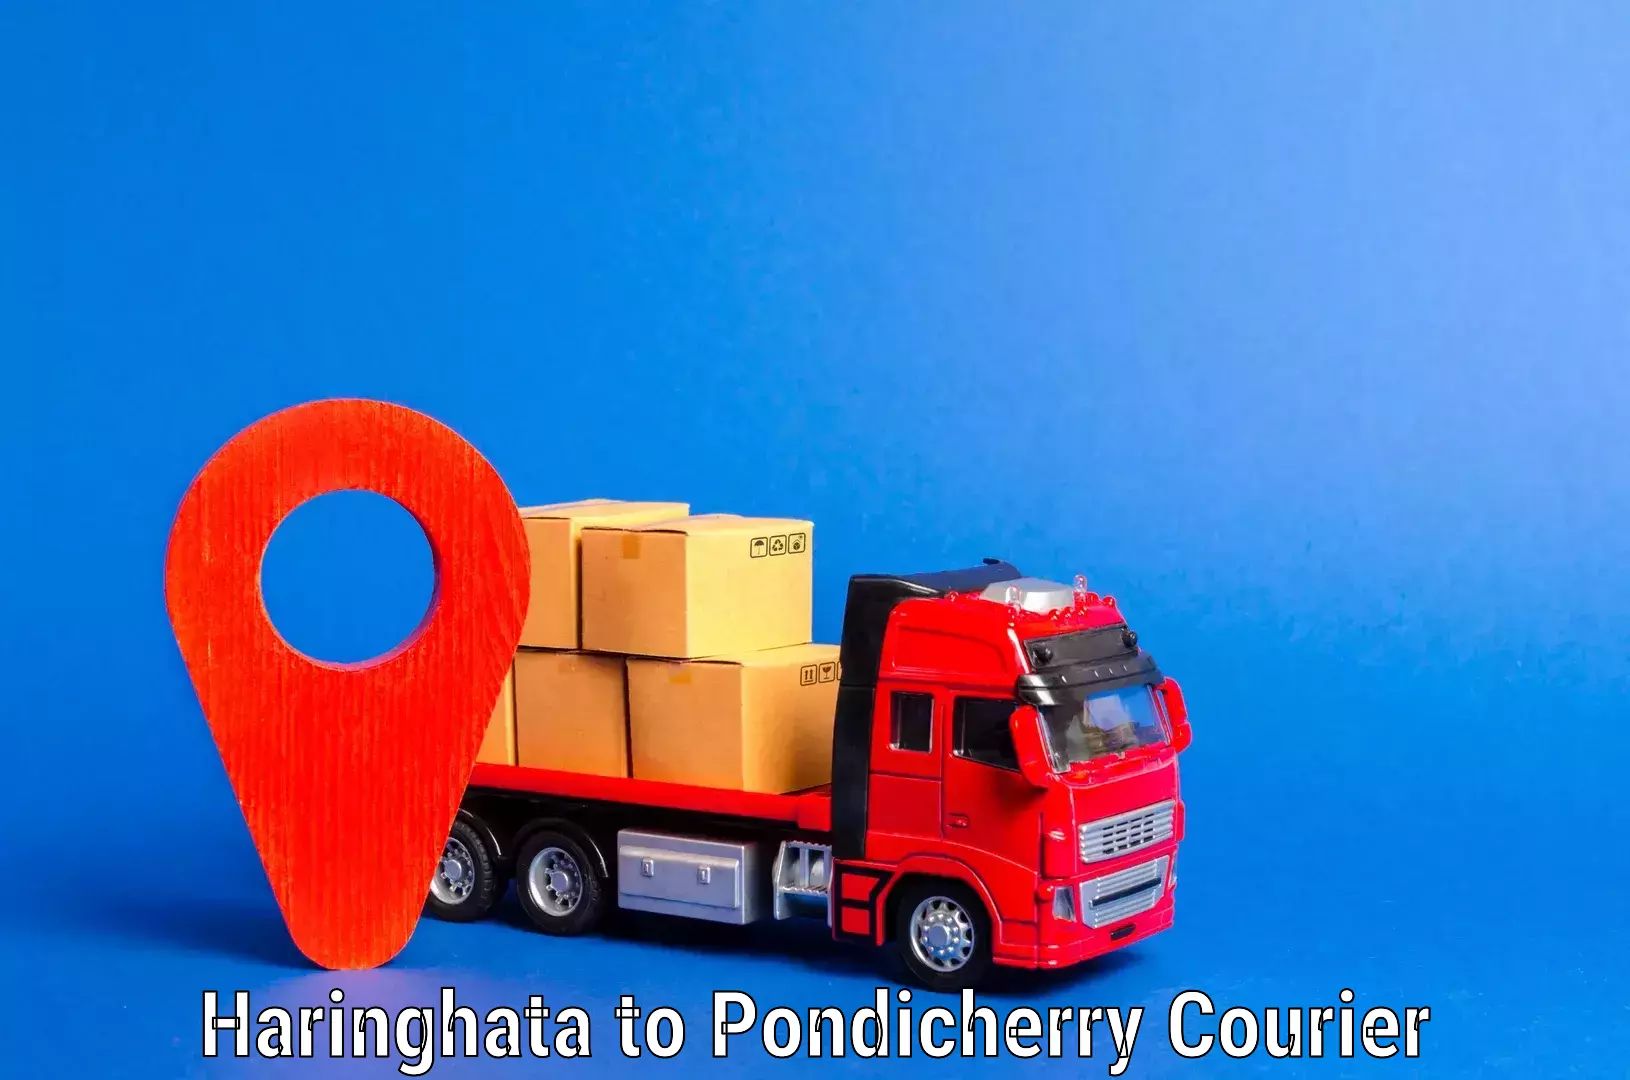 Furniture relocation experts Haringhata to Pondicherry